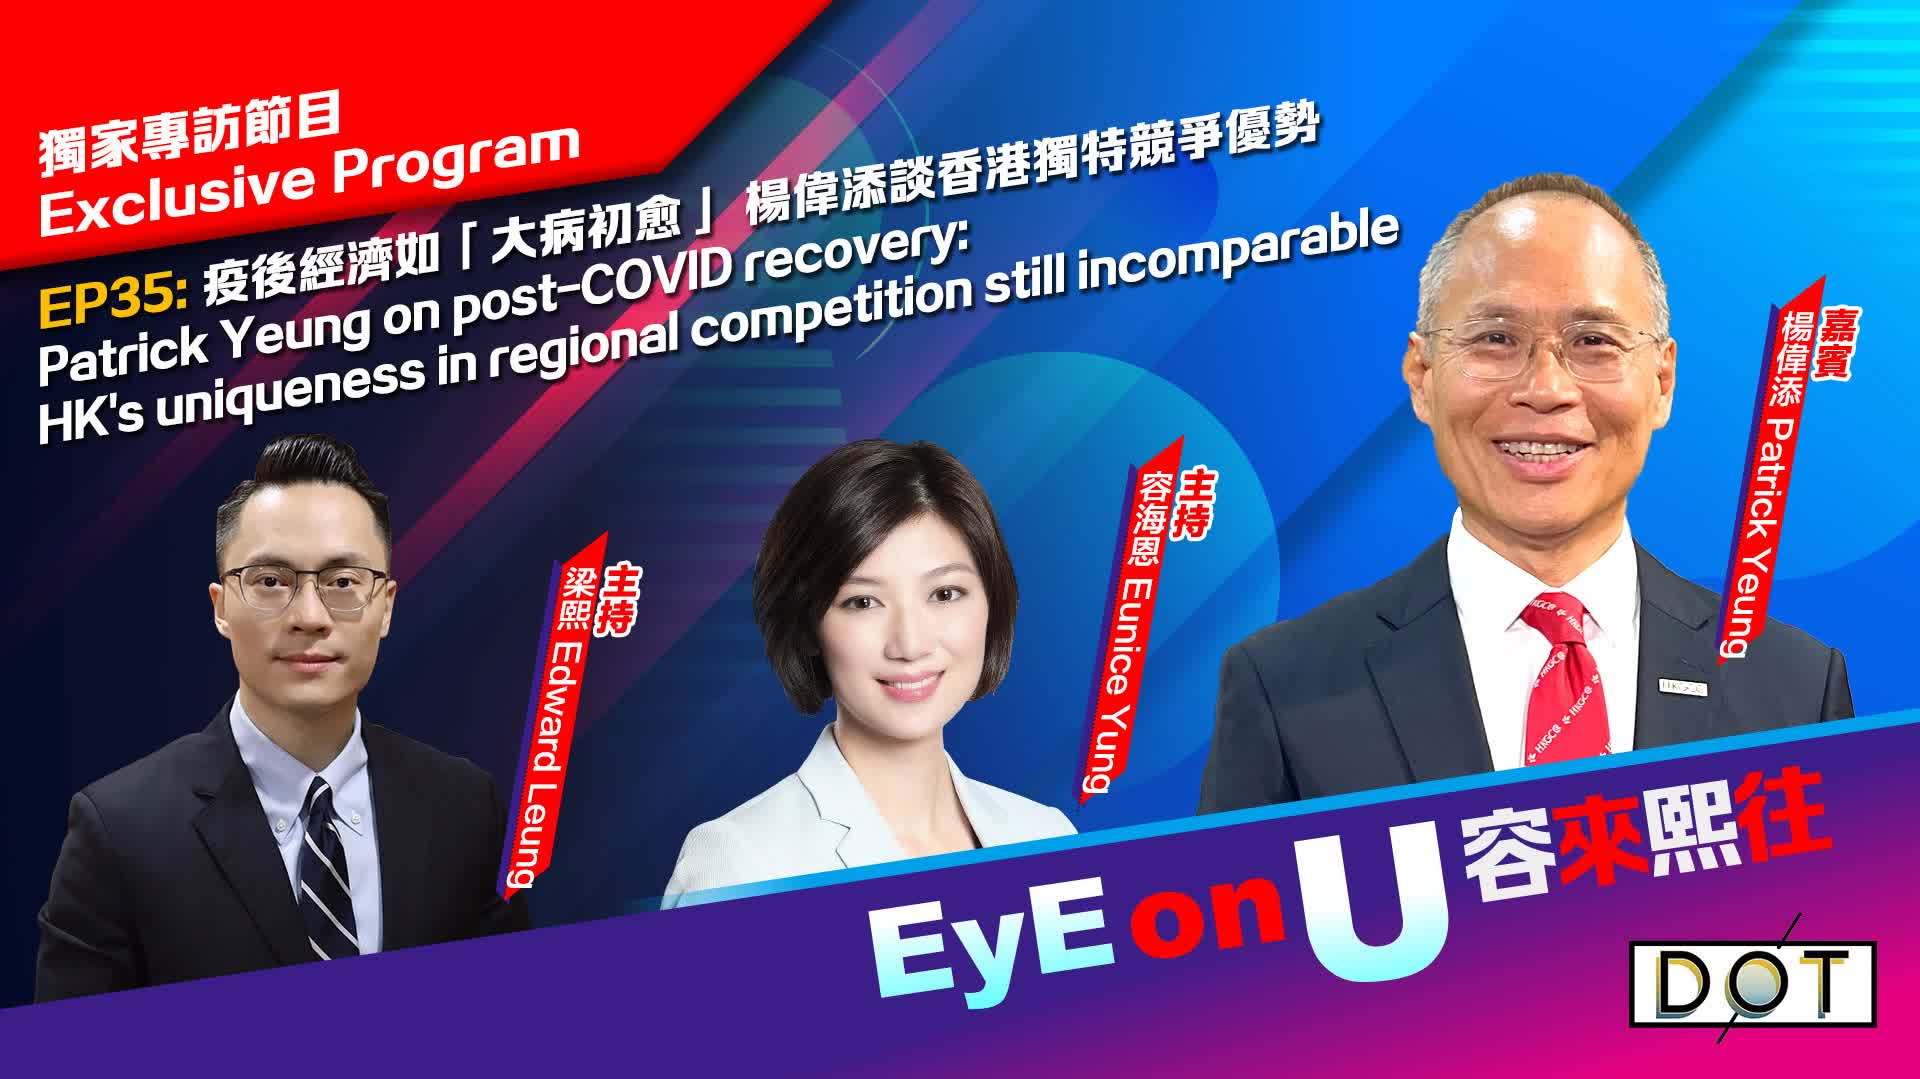 EyE on U | Patrick Yeung on post-COVID recovery: HK's uniqueness in regional competition still incomparable